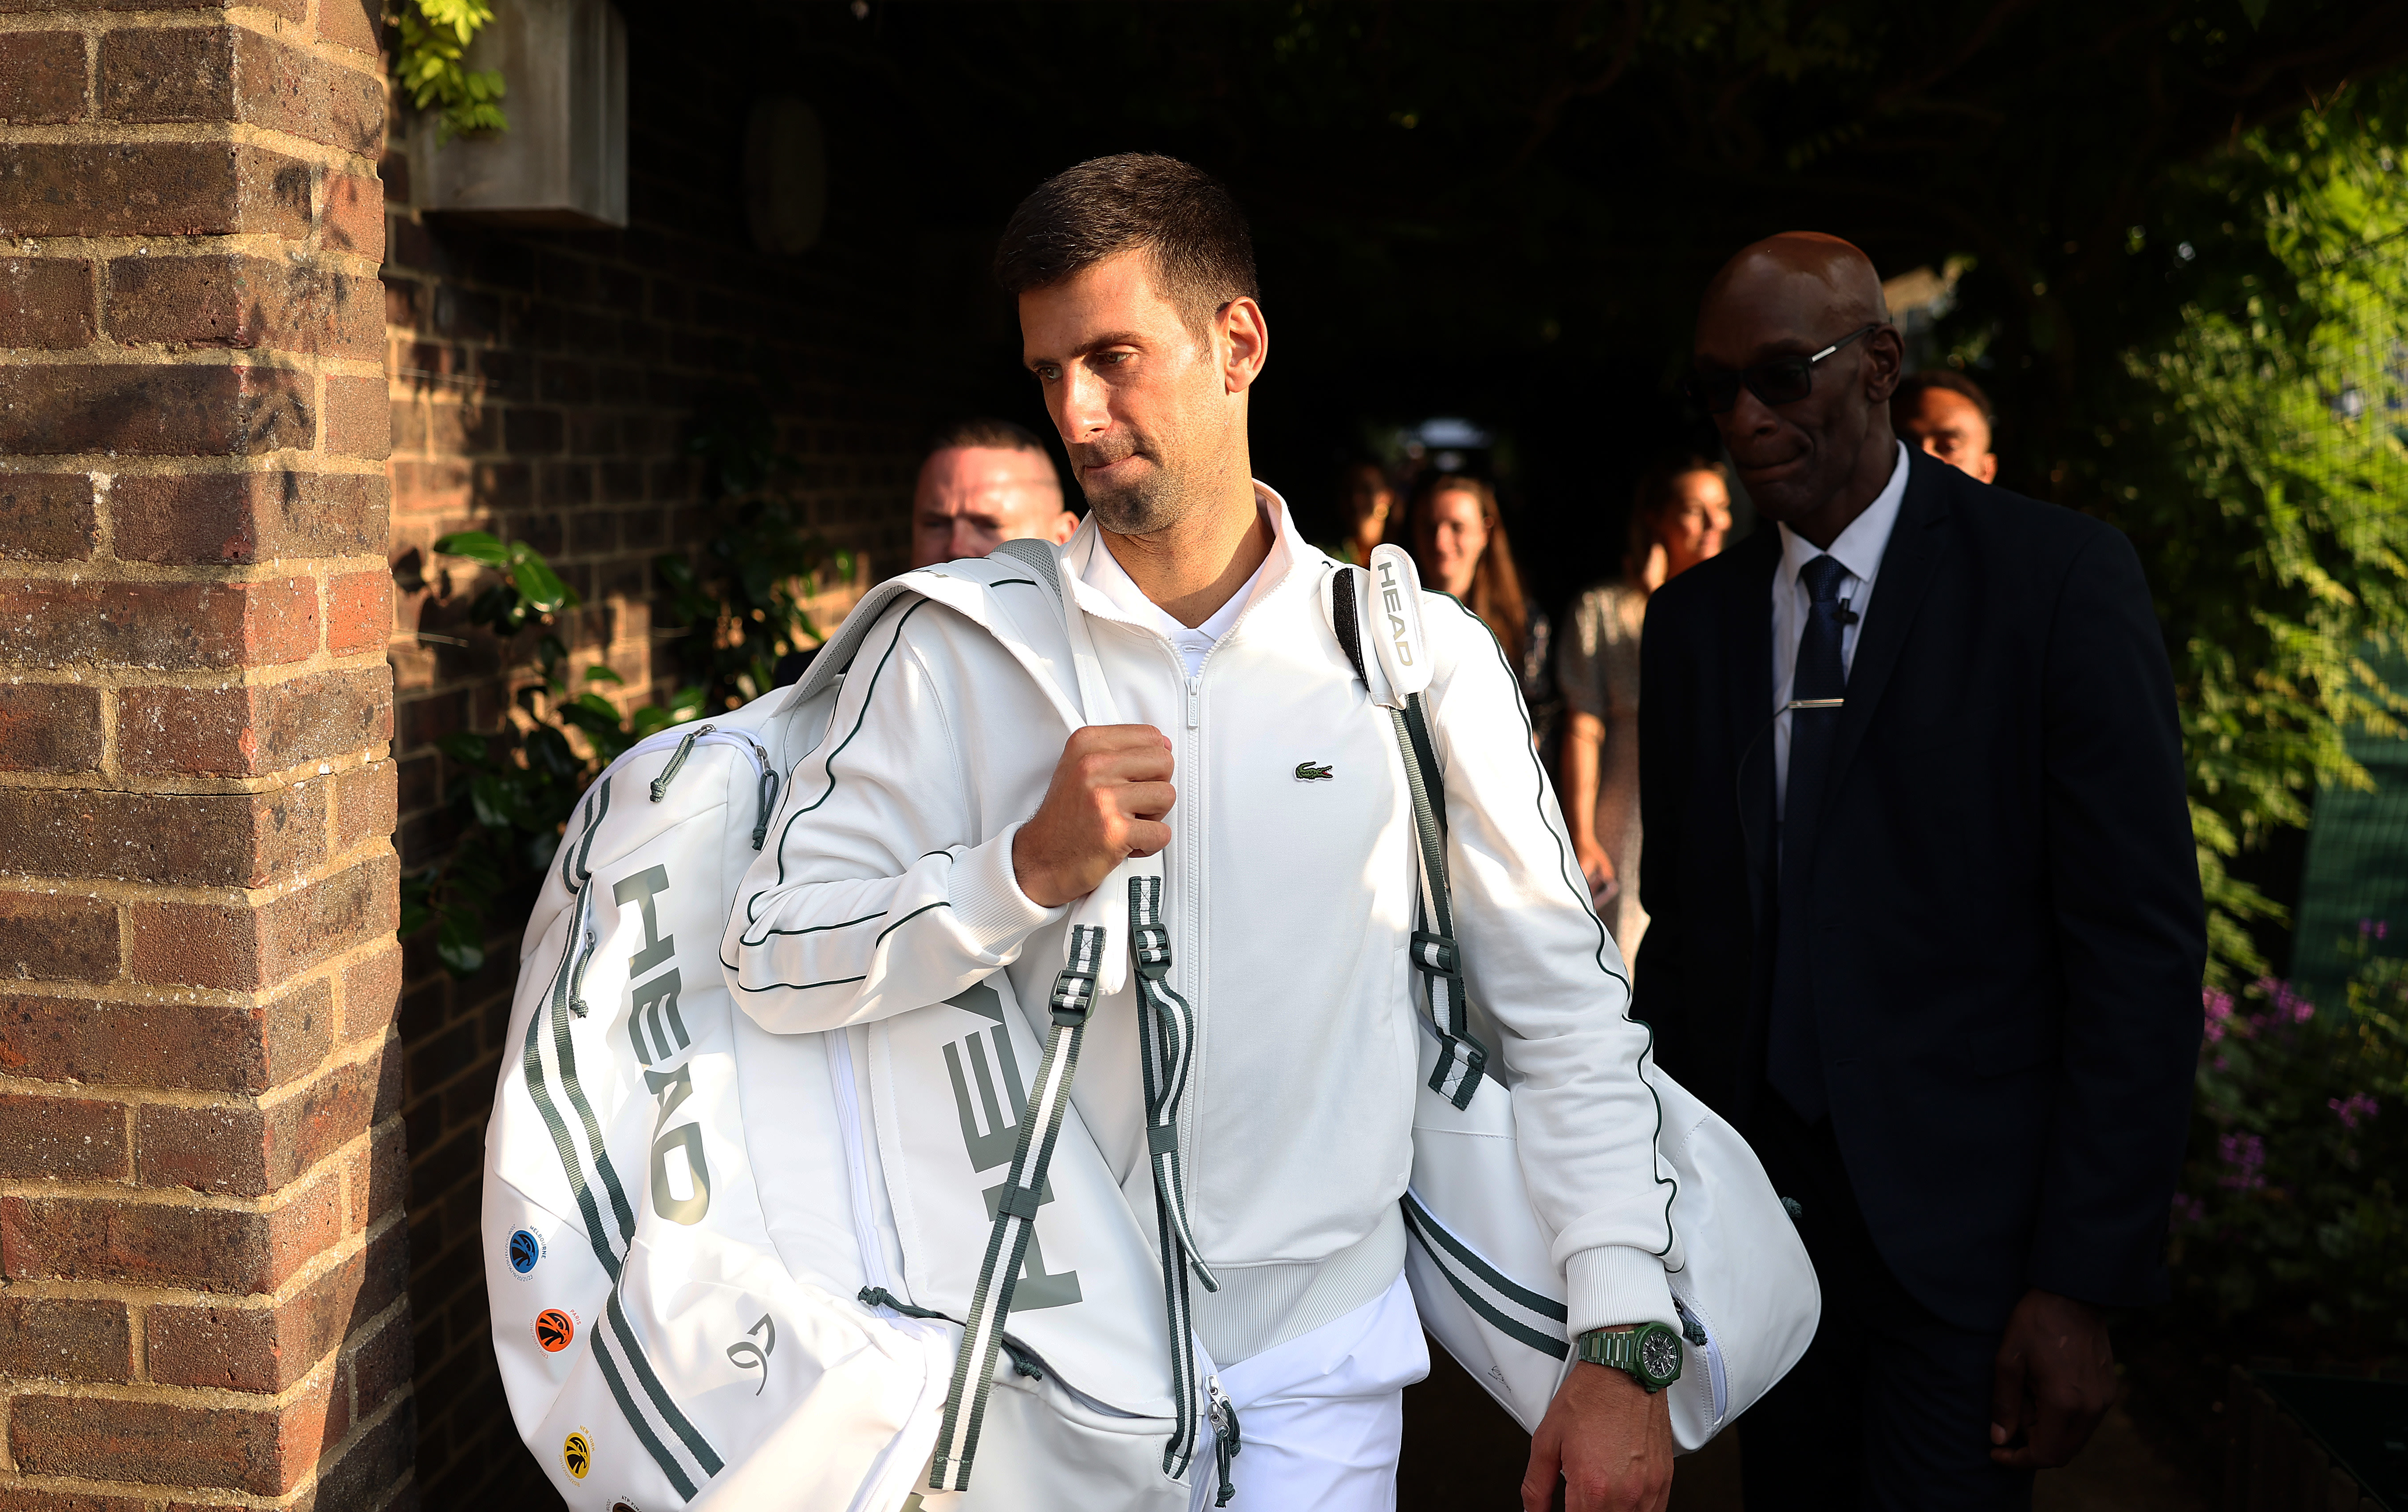 Novak Djokovic hasnt lost a completed match at Wimbledon since 2016